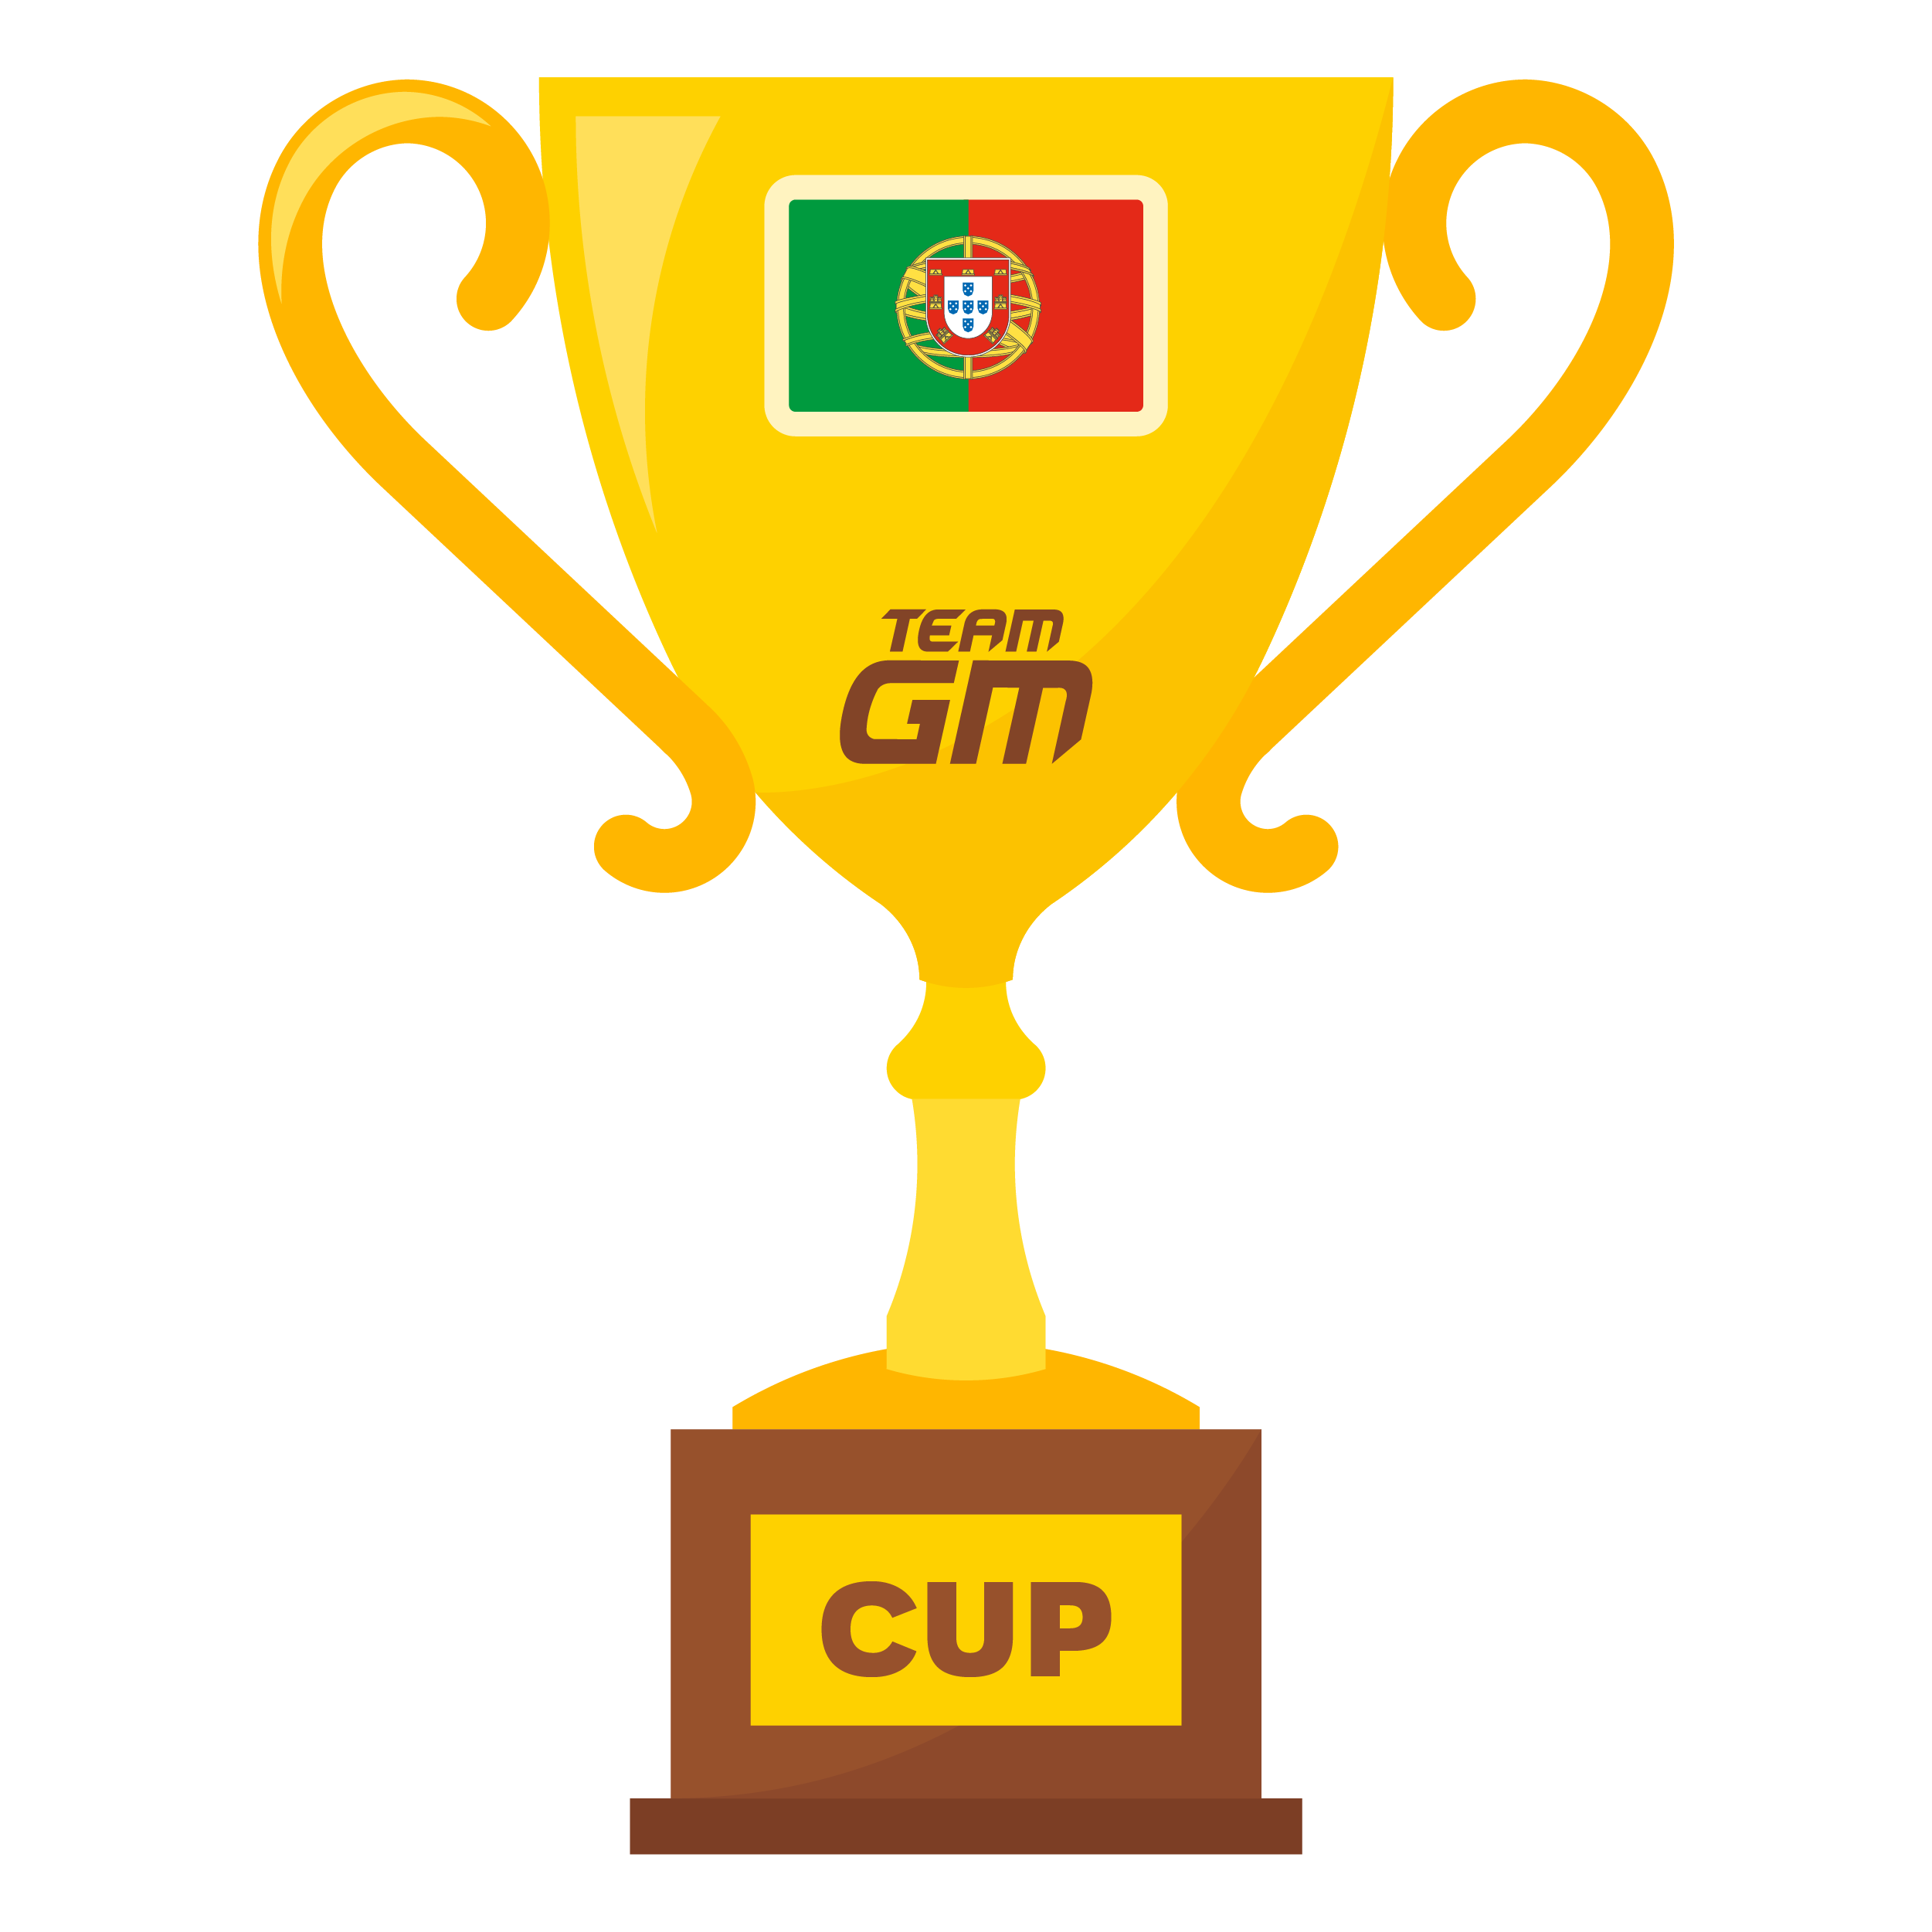 1ST - PORTUGAL CUP